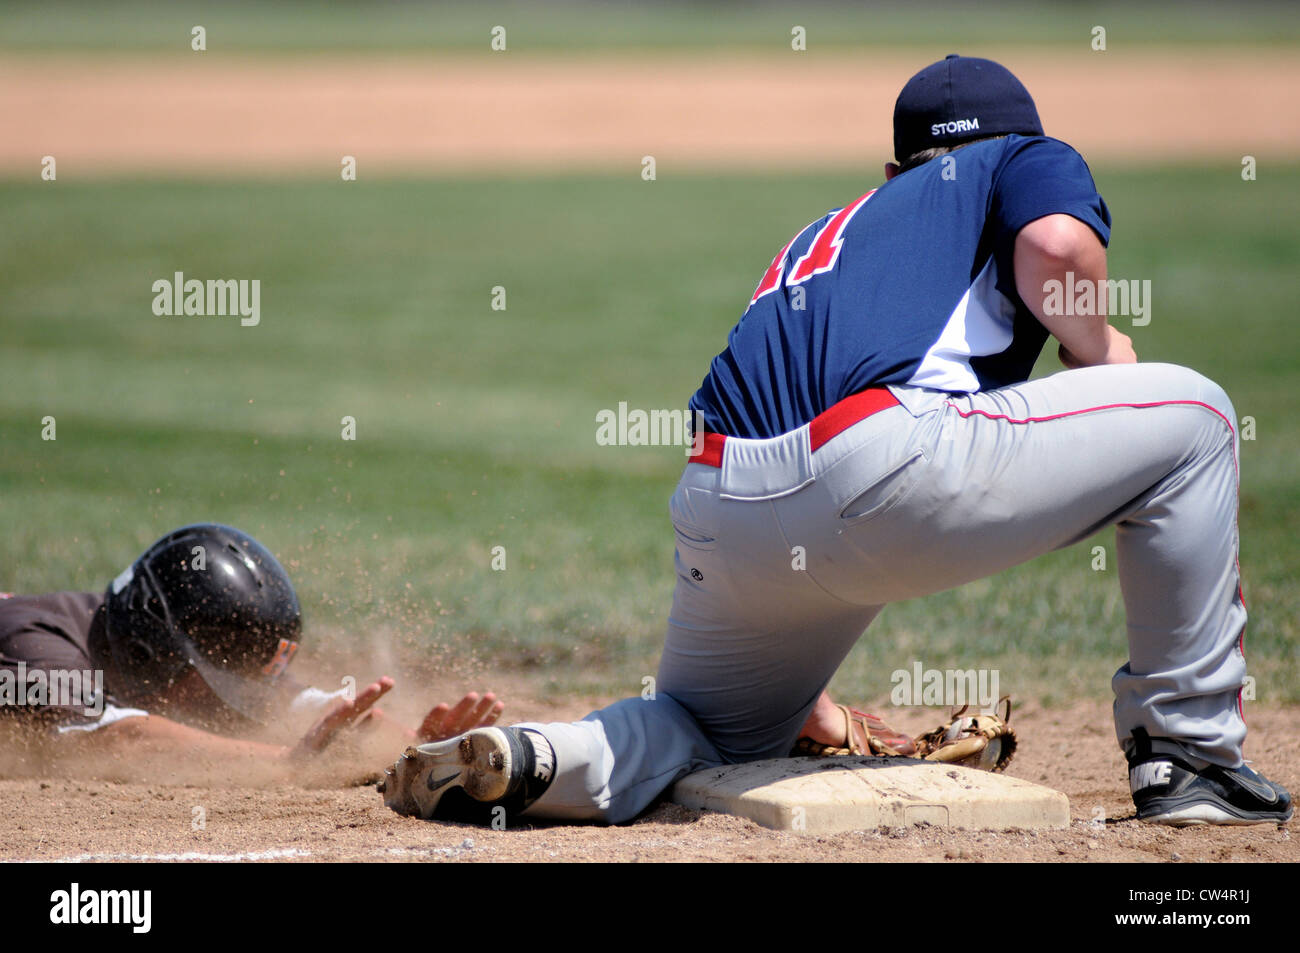 Third baseman receives a throw blocking the runner that is sliding head first into third base. USA. Stock Photo